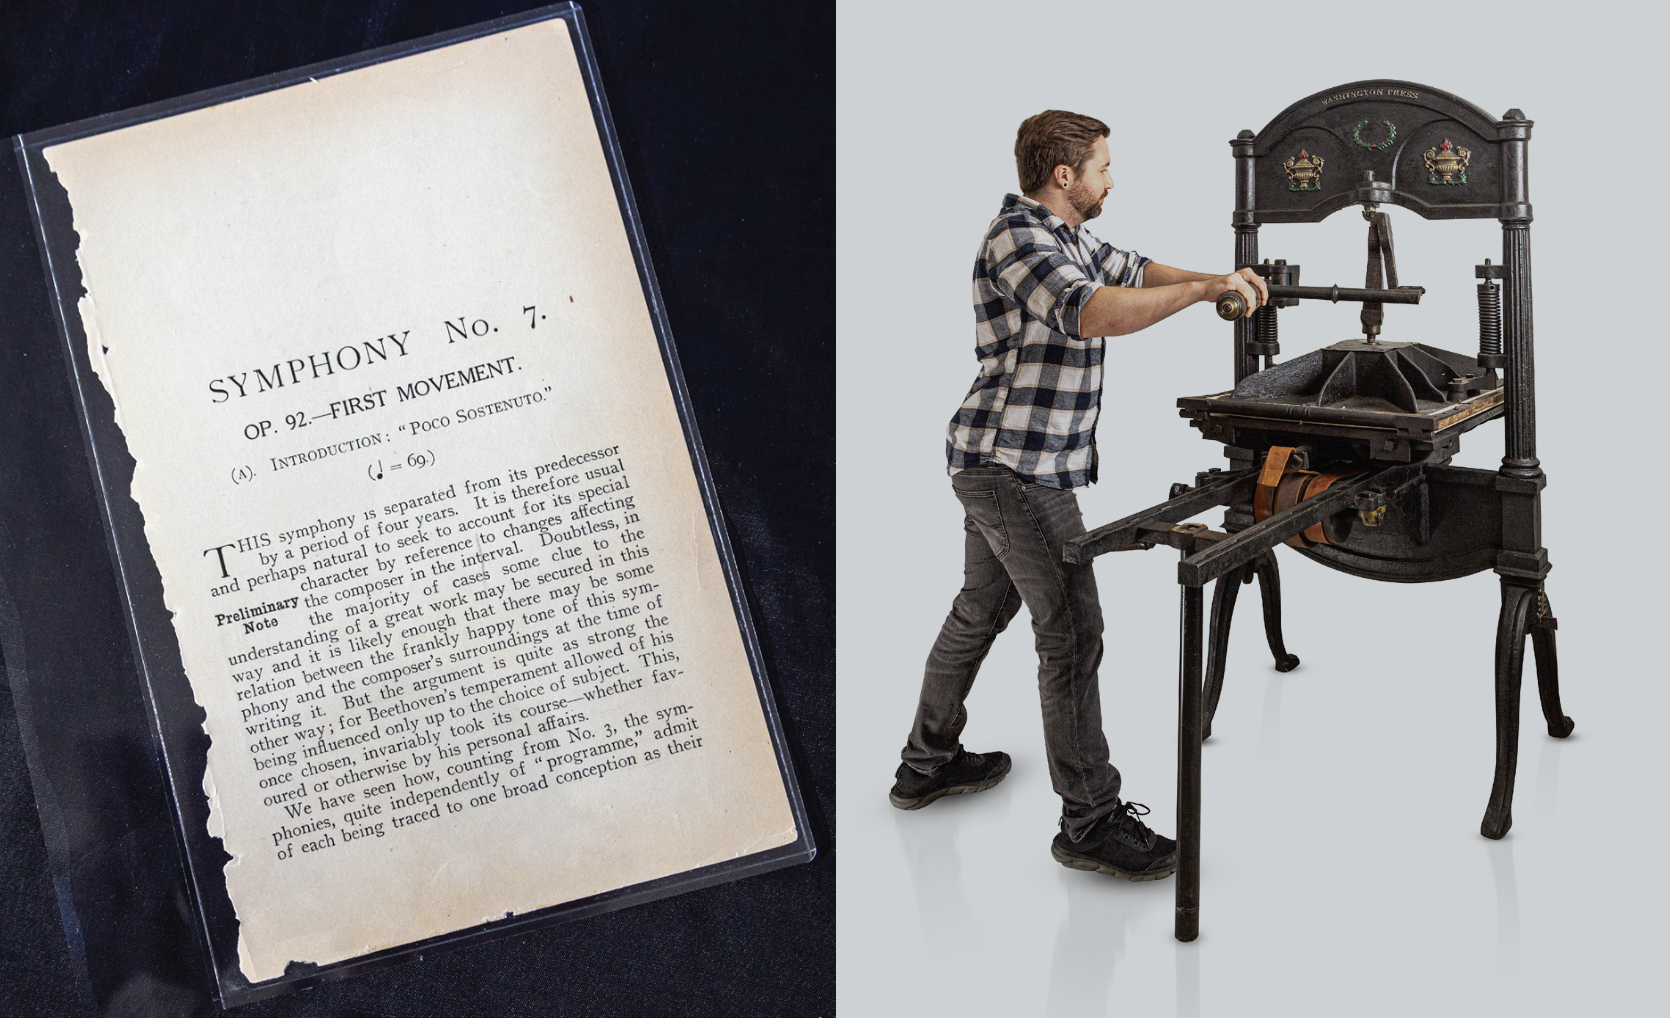 two photos side by side one of a preserved sheet of paper and one of a man operating a welding machine that executes the paper preservation, photo by Nick Sloff '92 A&A